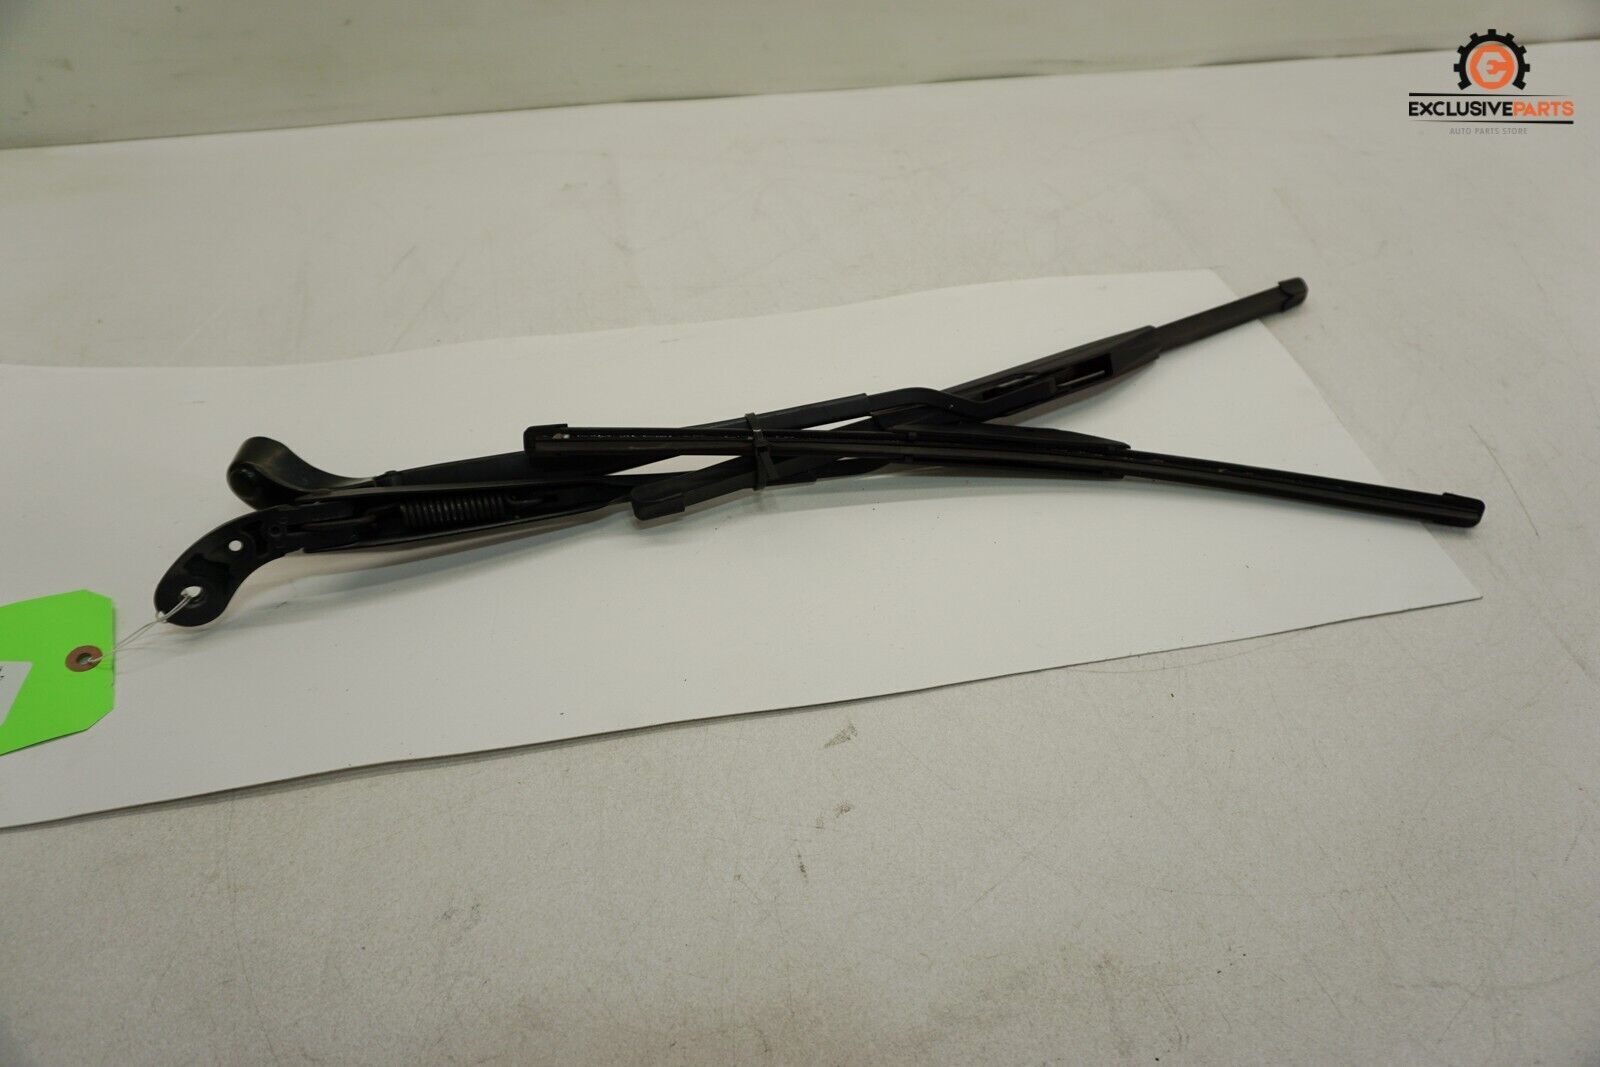 02-08 Mini Cooper S Hatchback 1.6 OEM Windshield Wiper Arm Wipers Arms Pair 1129